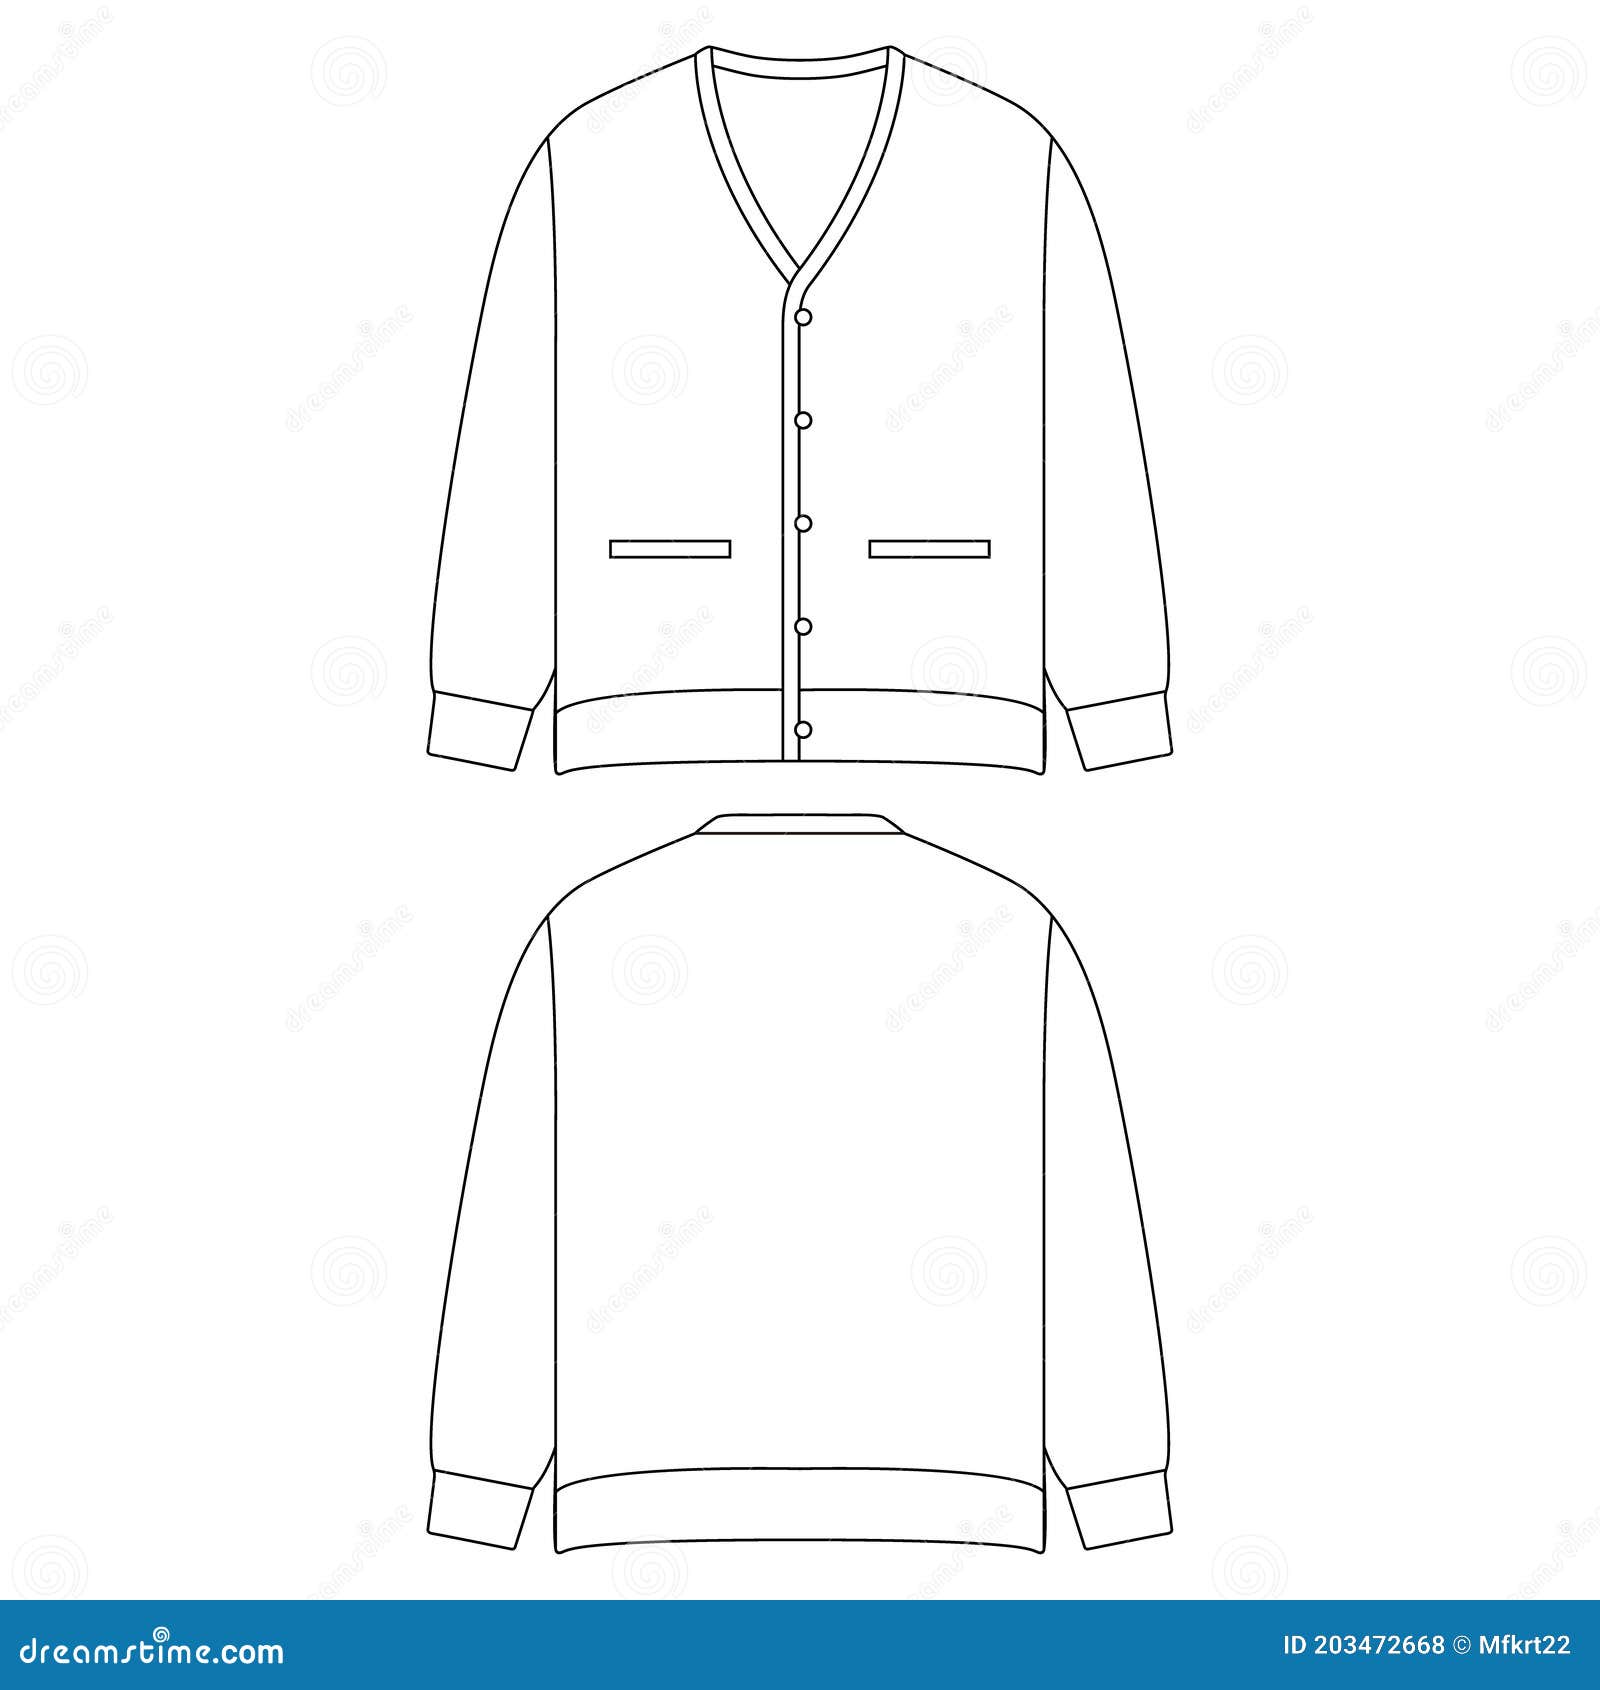 Template Knit Cardigan Garment Vector Flat Design Outline Clothing ...